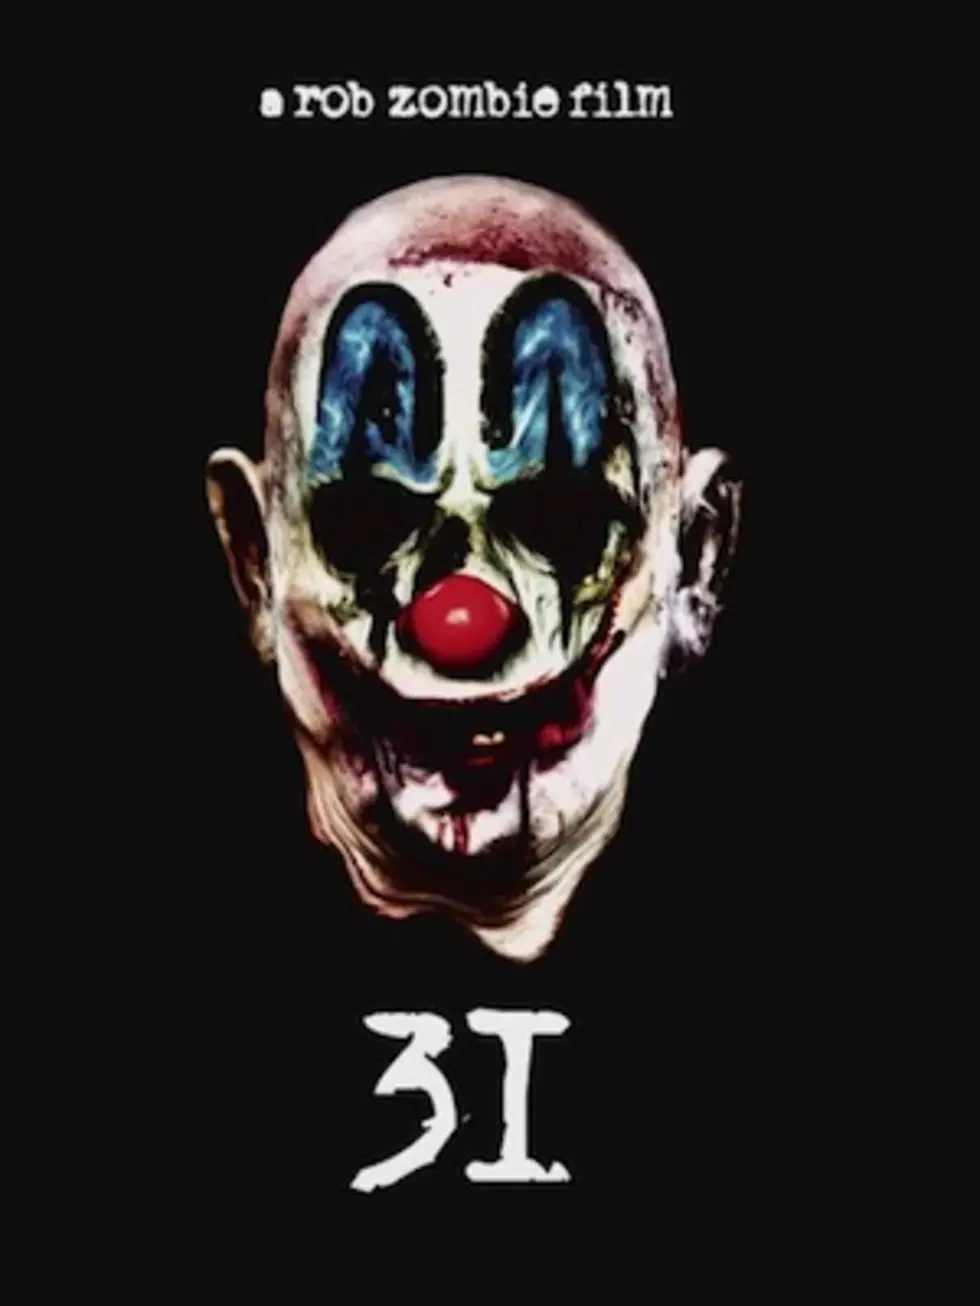 Rob Zombie to Premiere New Horror Film &#8217;31&#8217; in January 2016